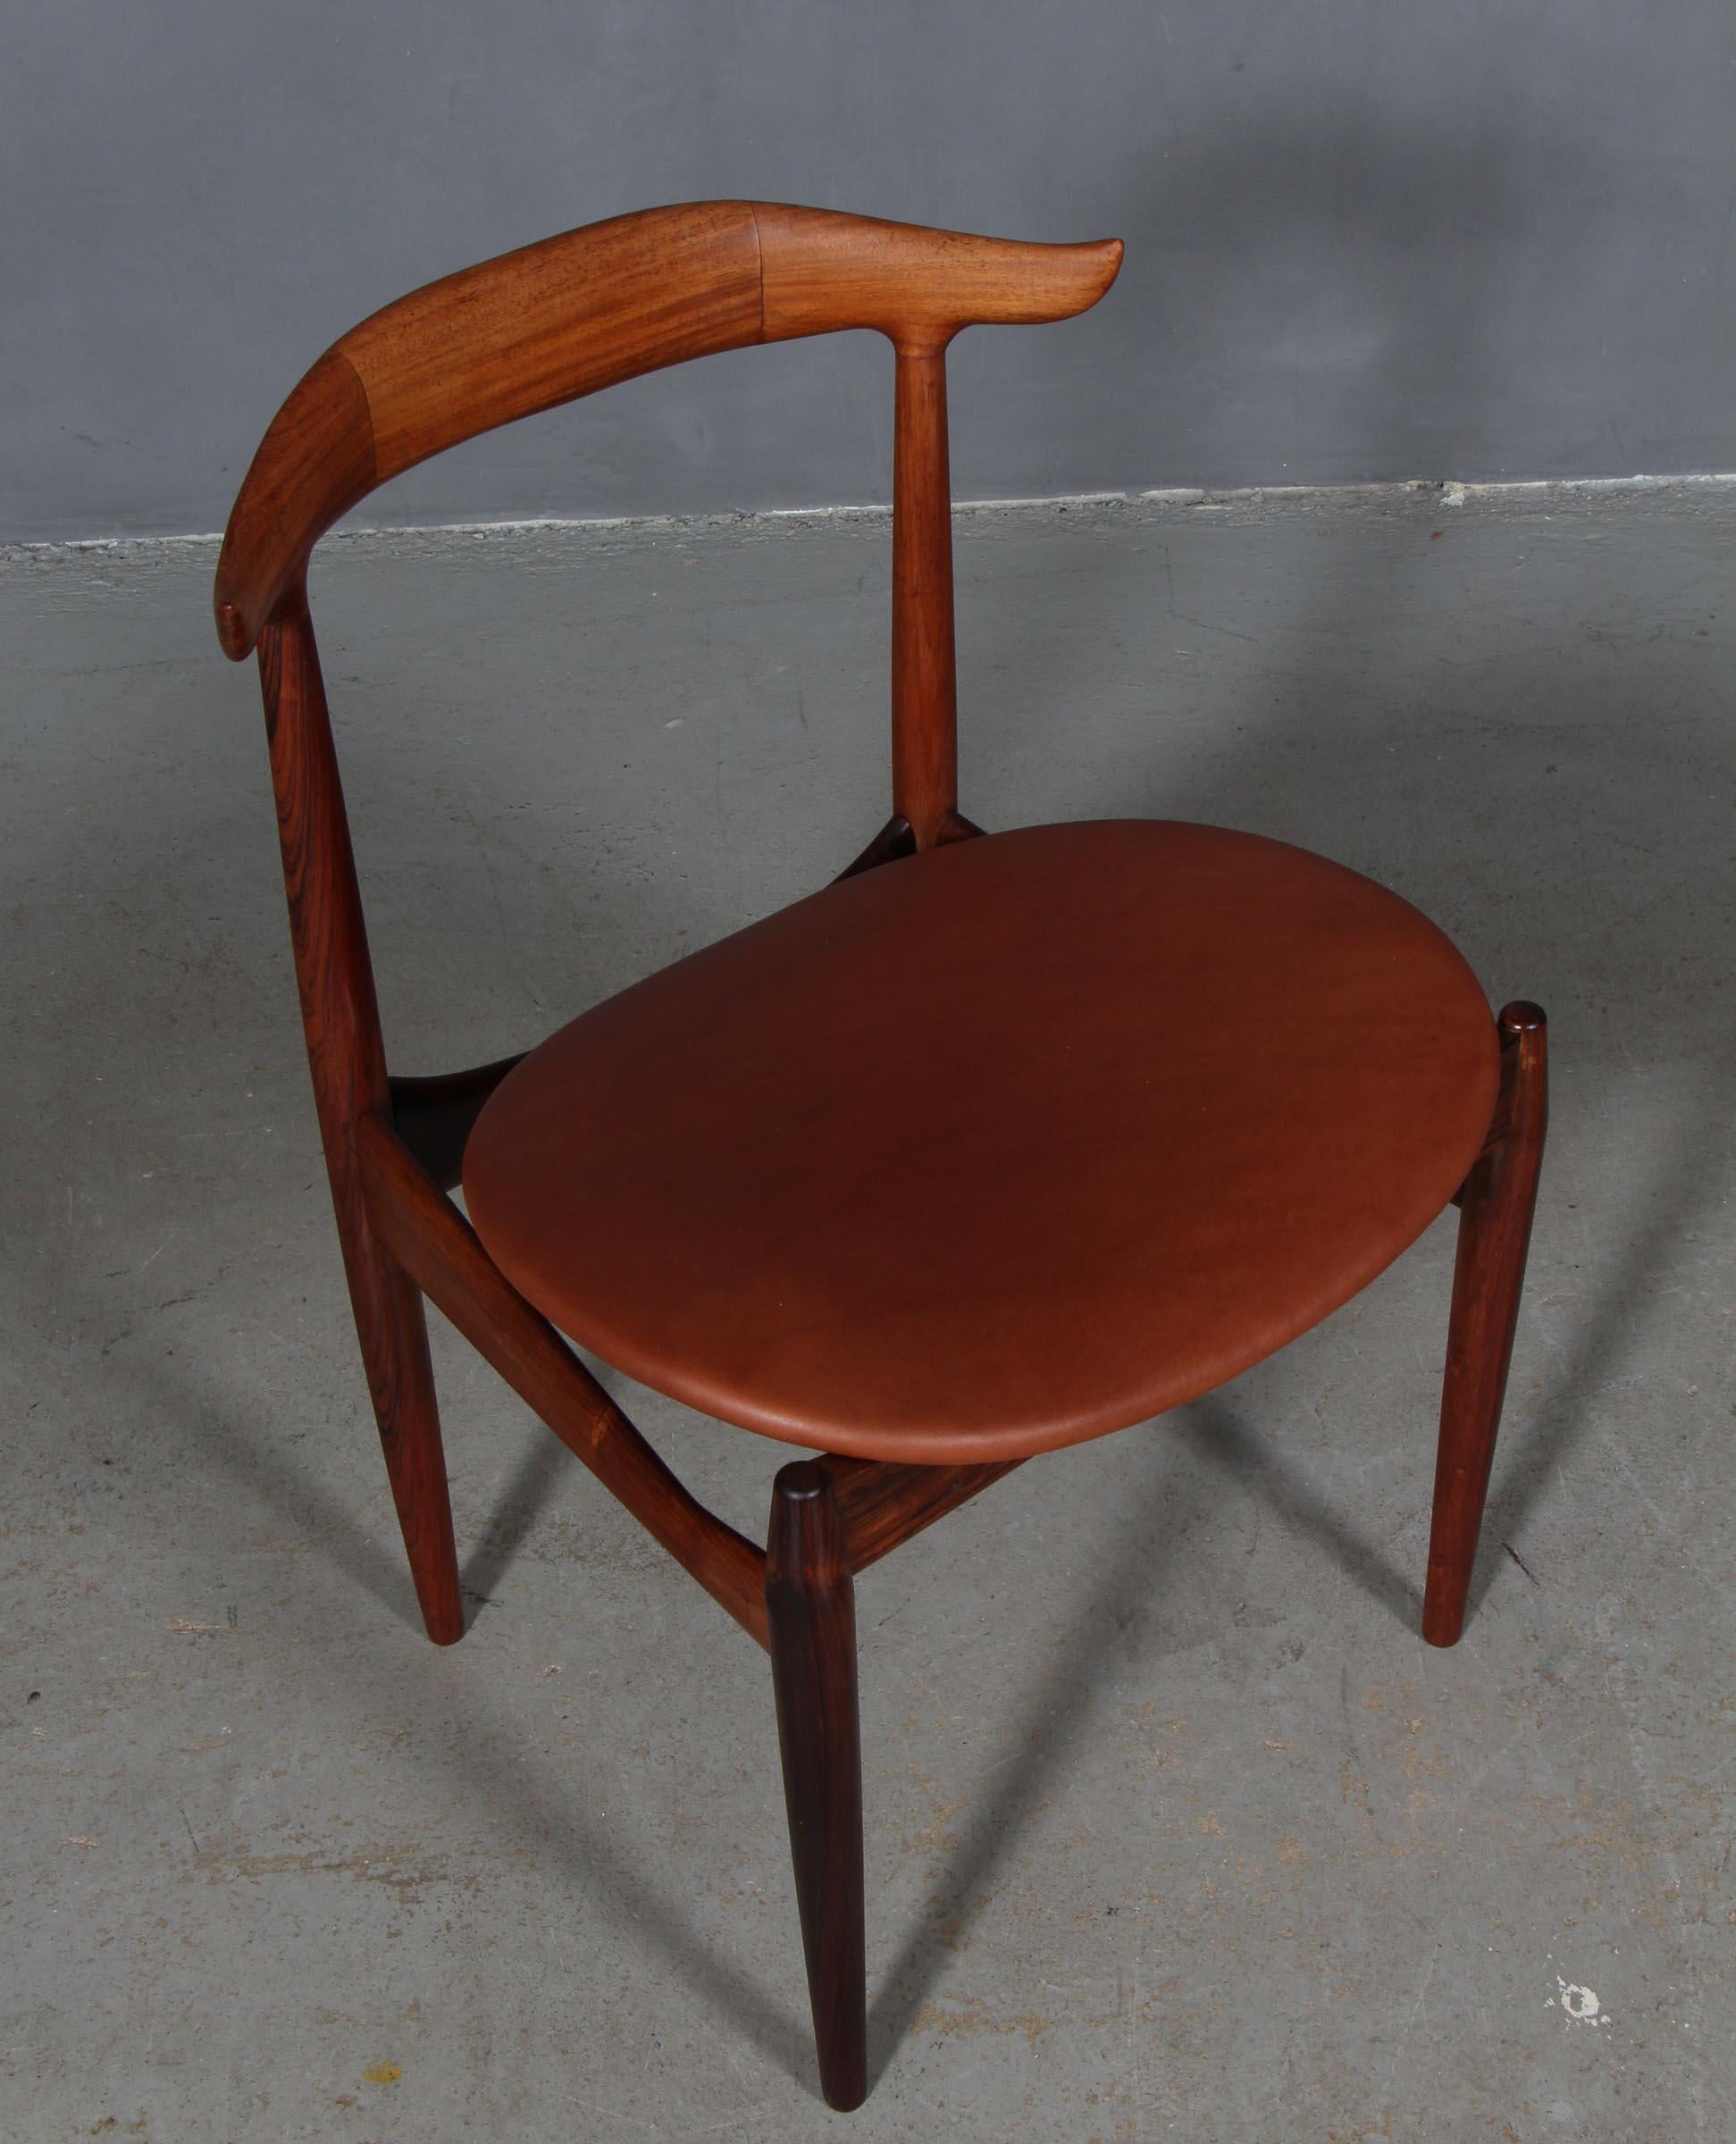 Knud Færch cowhorn arm chair in solid rosewood. 

New upholstered with aniline leather.

Model 215 by Slagelse Møbelværk.